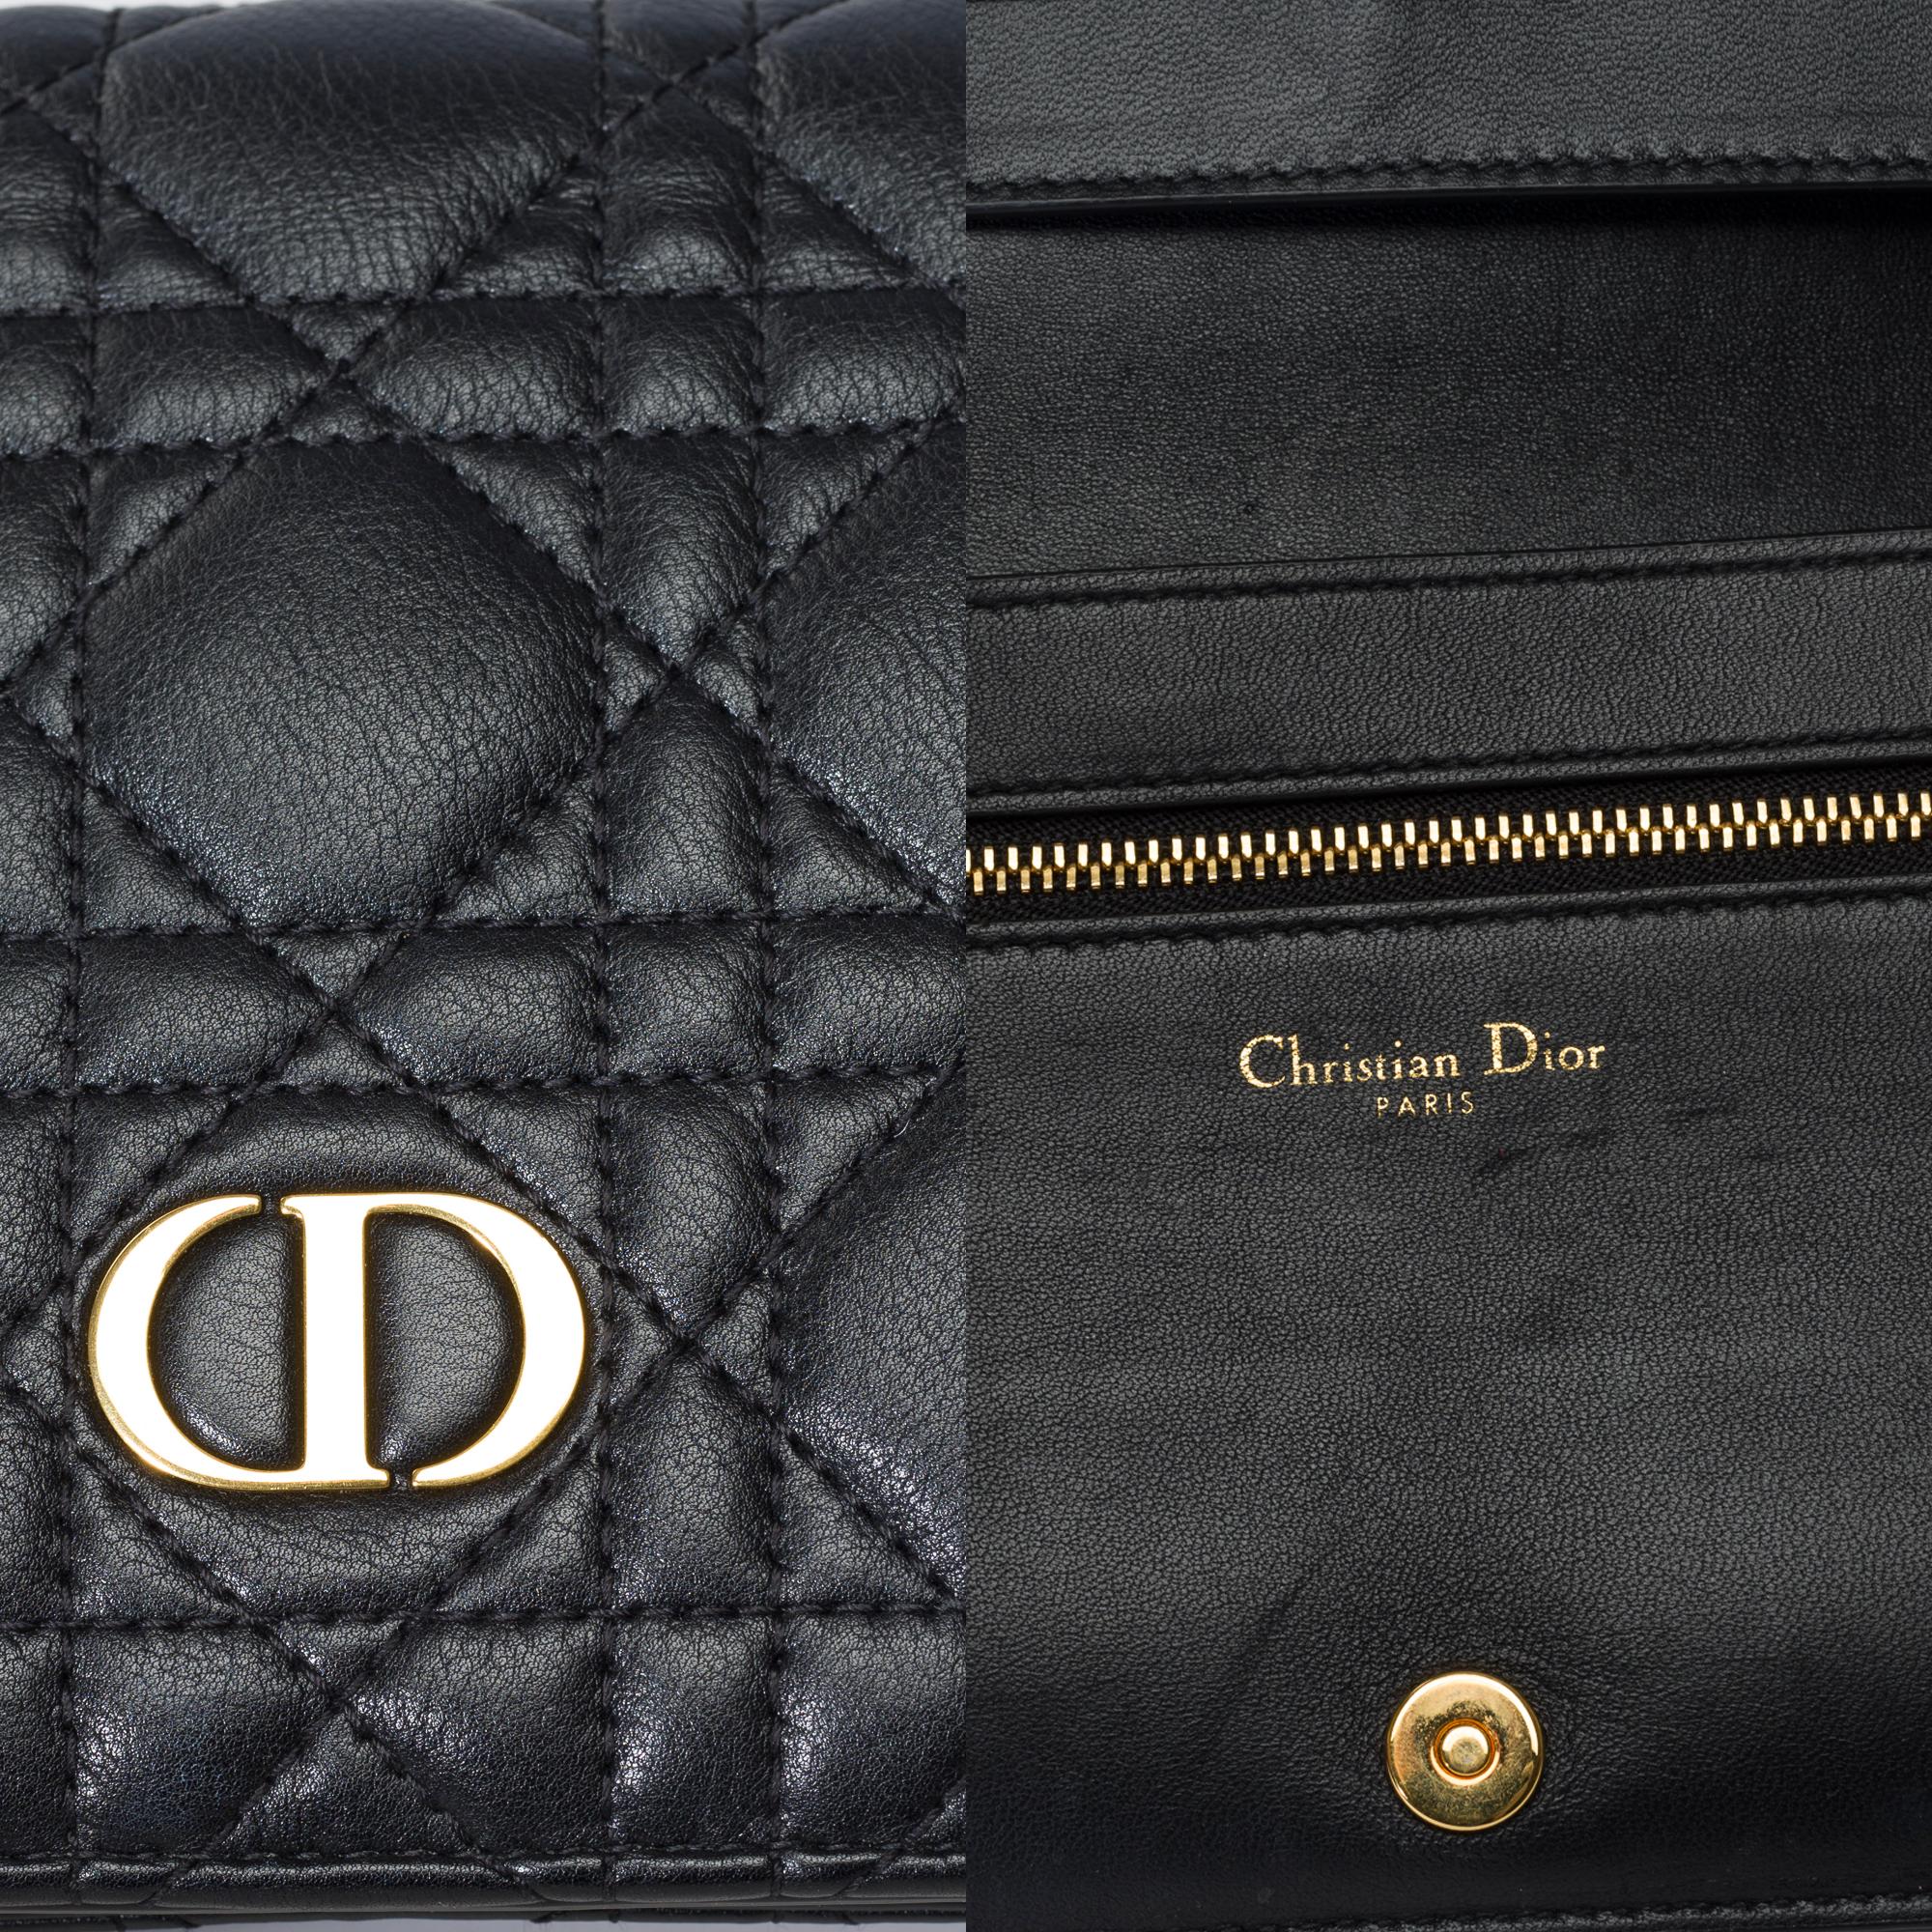 Christian Dior Caro long Wallet in black cannage leather, GHW For Sale 2